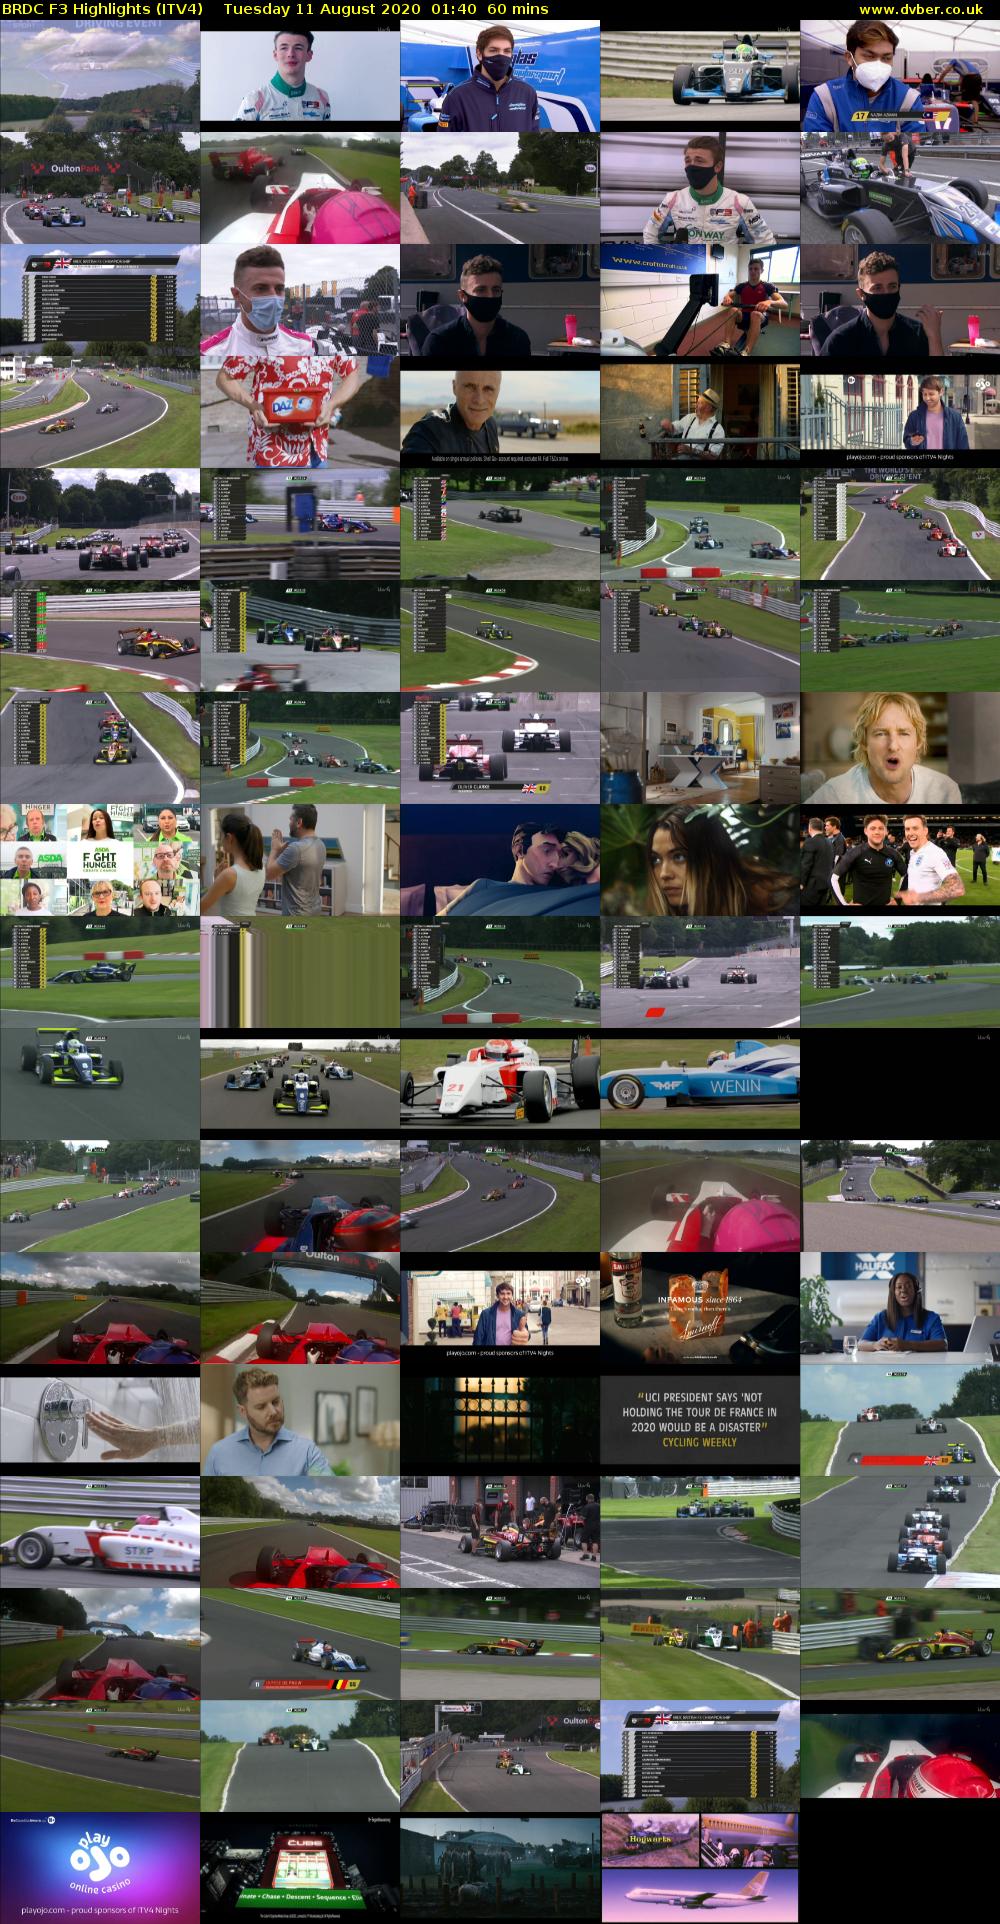 BRDC F3 Highlights (ITV4) Tuesday 11 August 2020 01:40 - 02:40